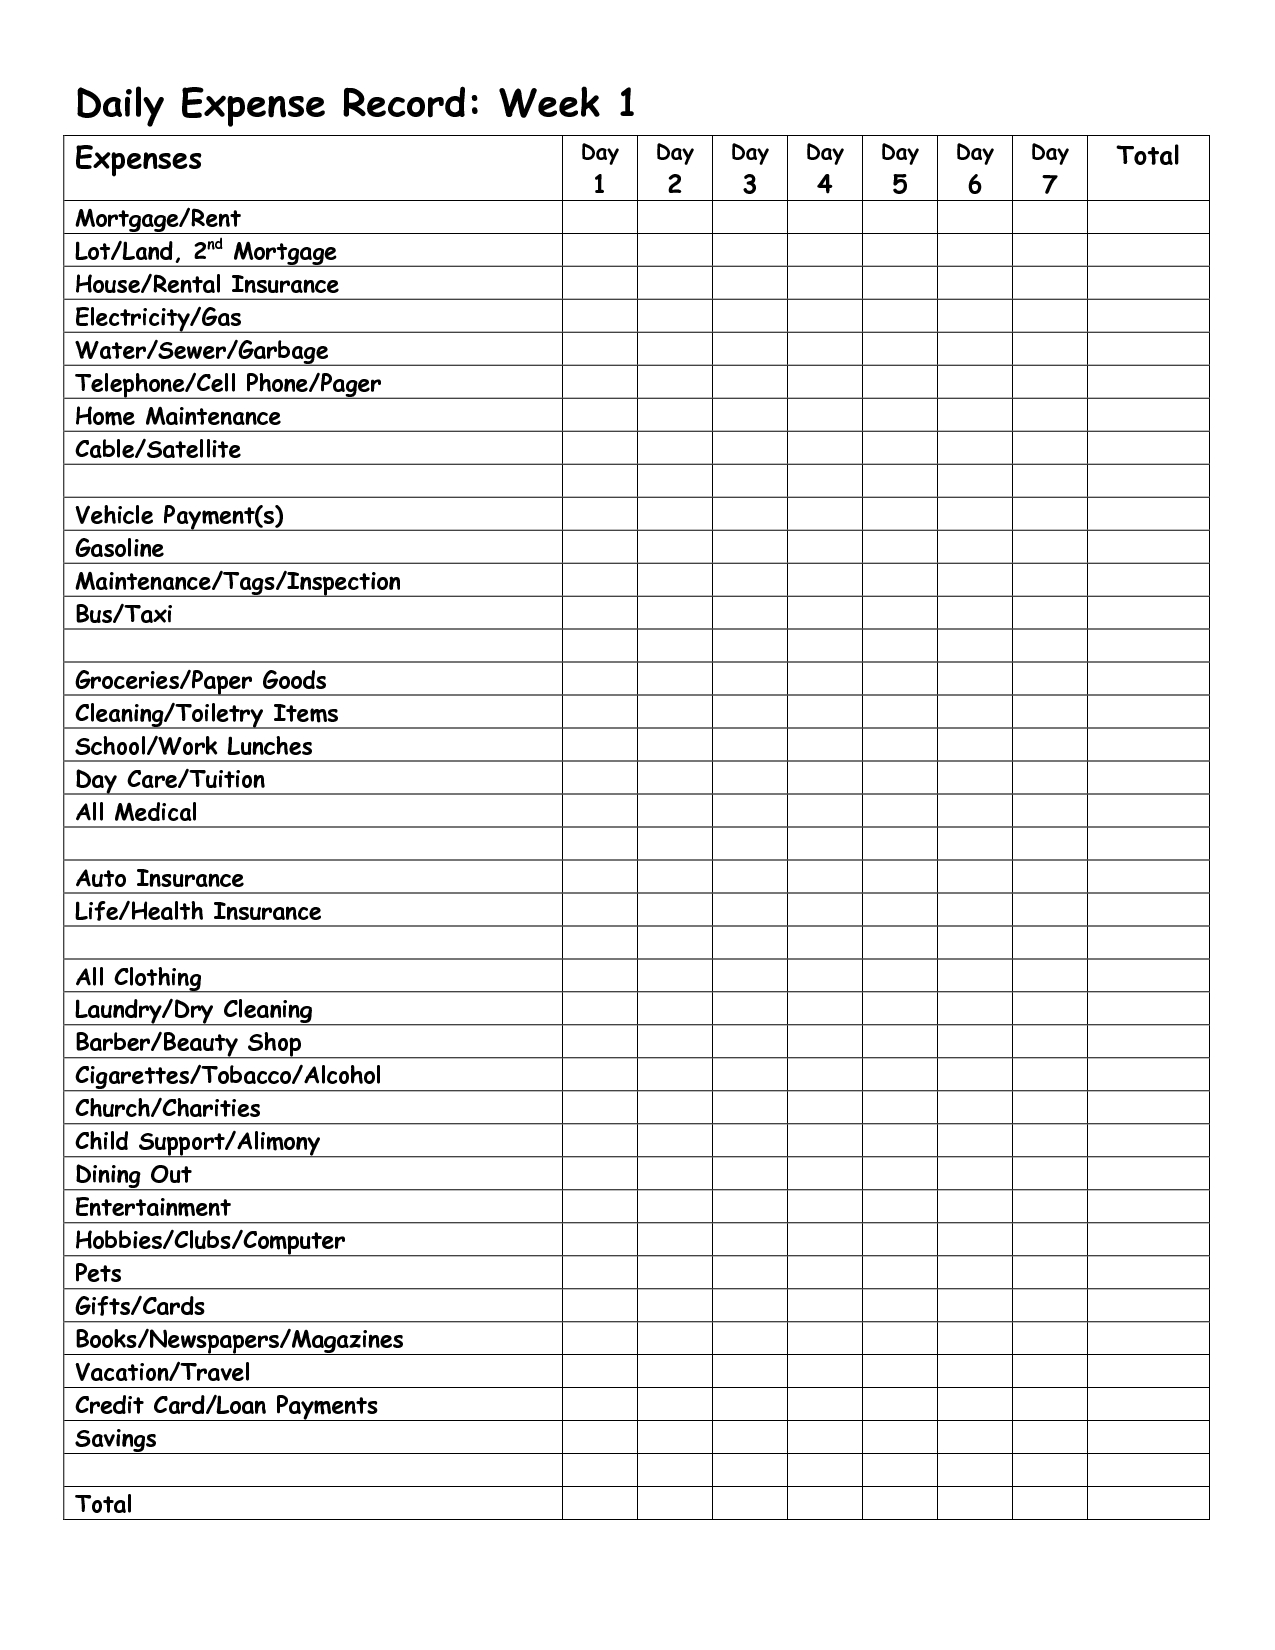 Daily Budget Spreadsheet Worksheet Pdf Expense Tracker Excel